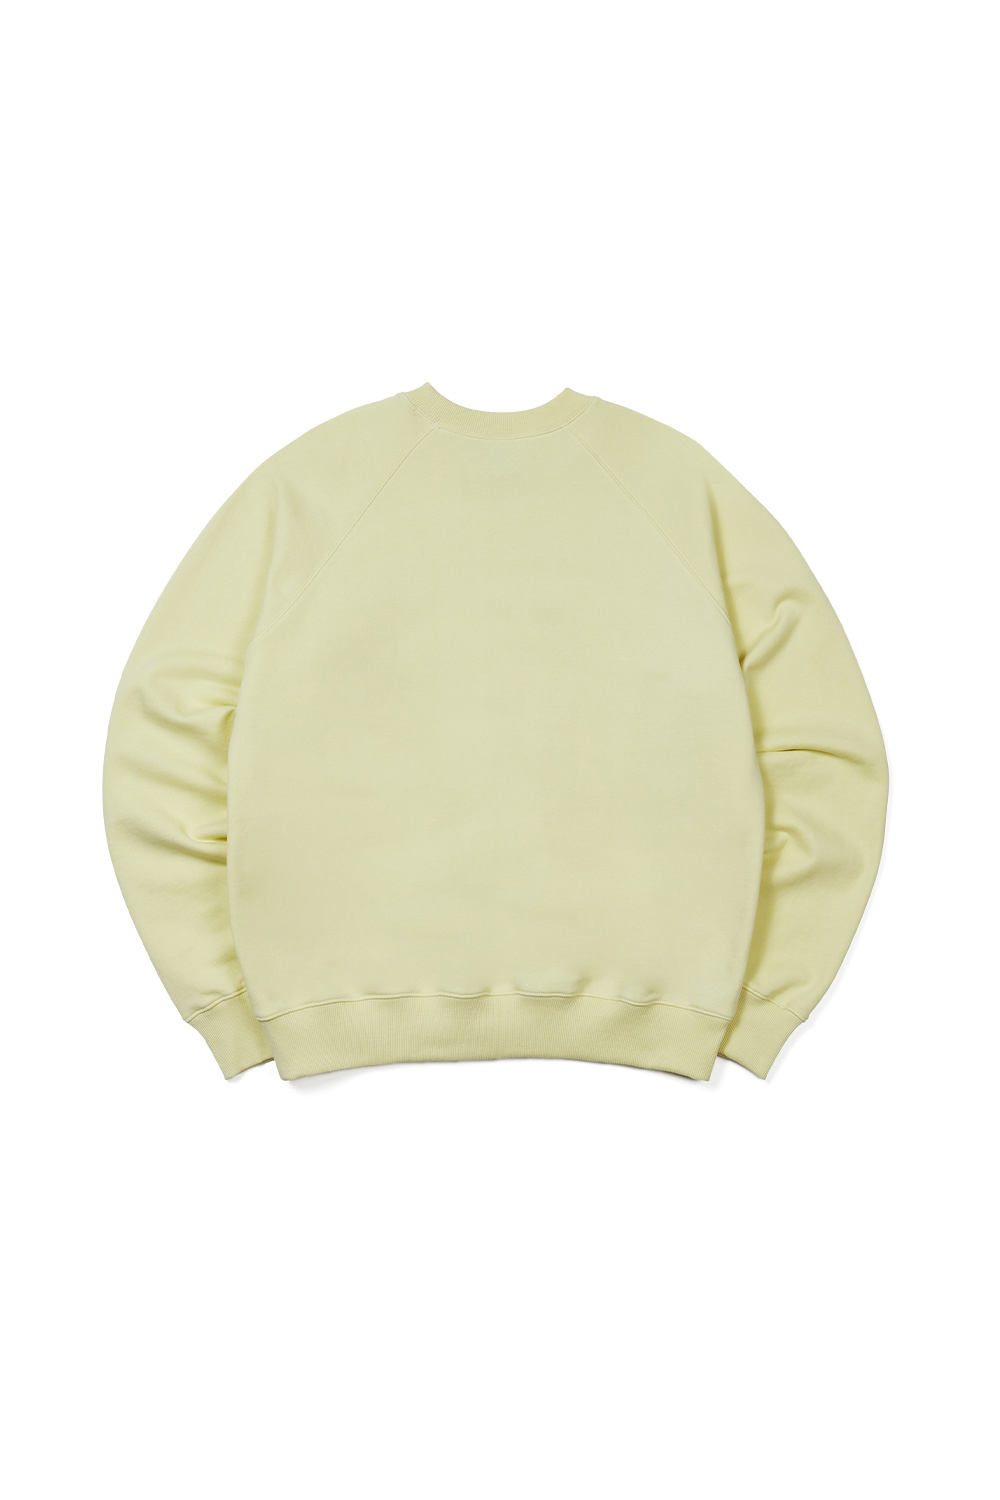 long sleeved tee ivory color image-S31L3